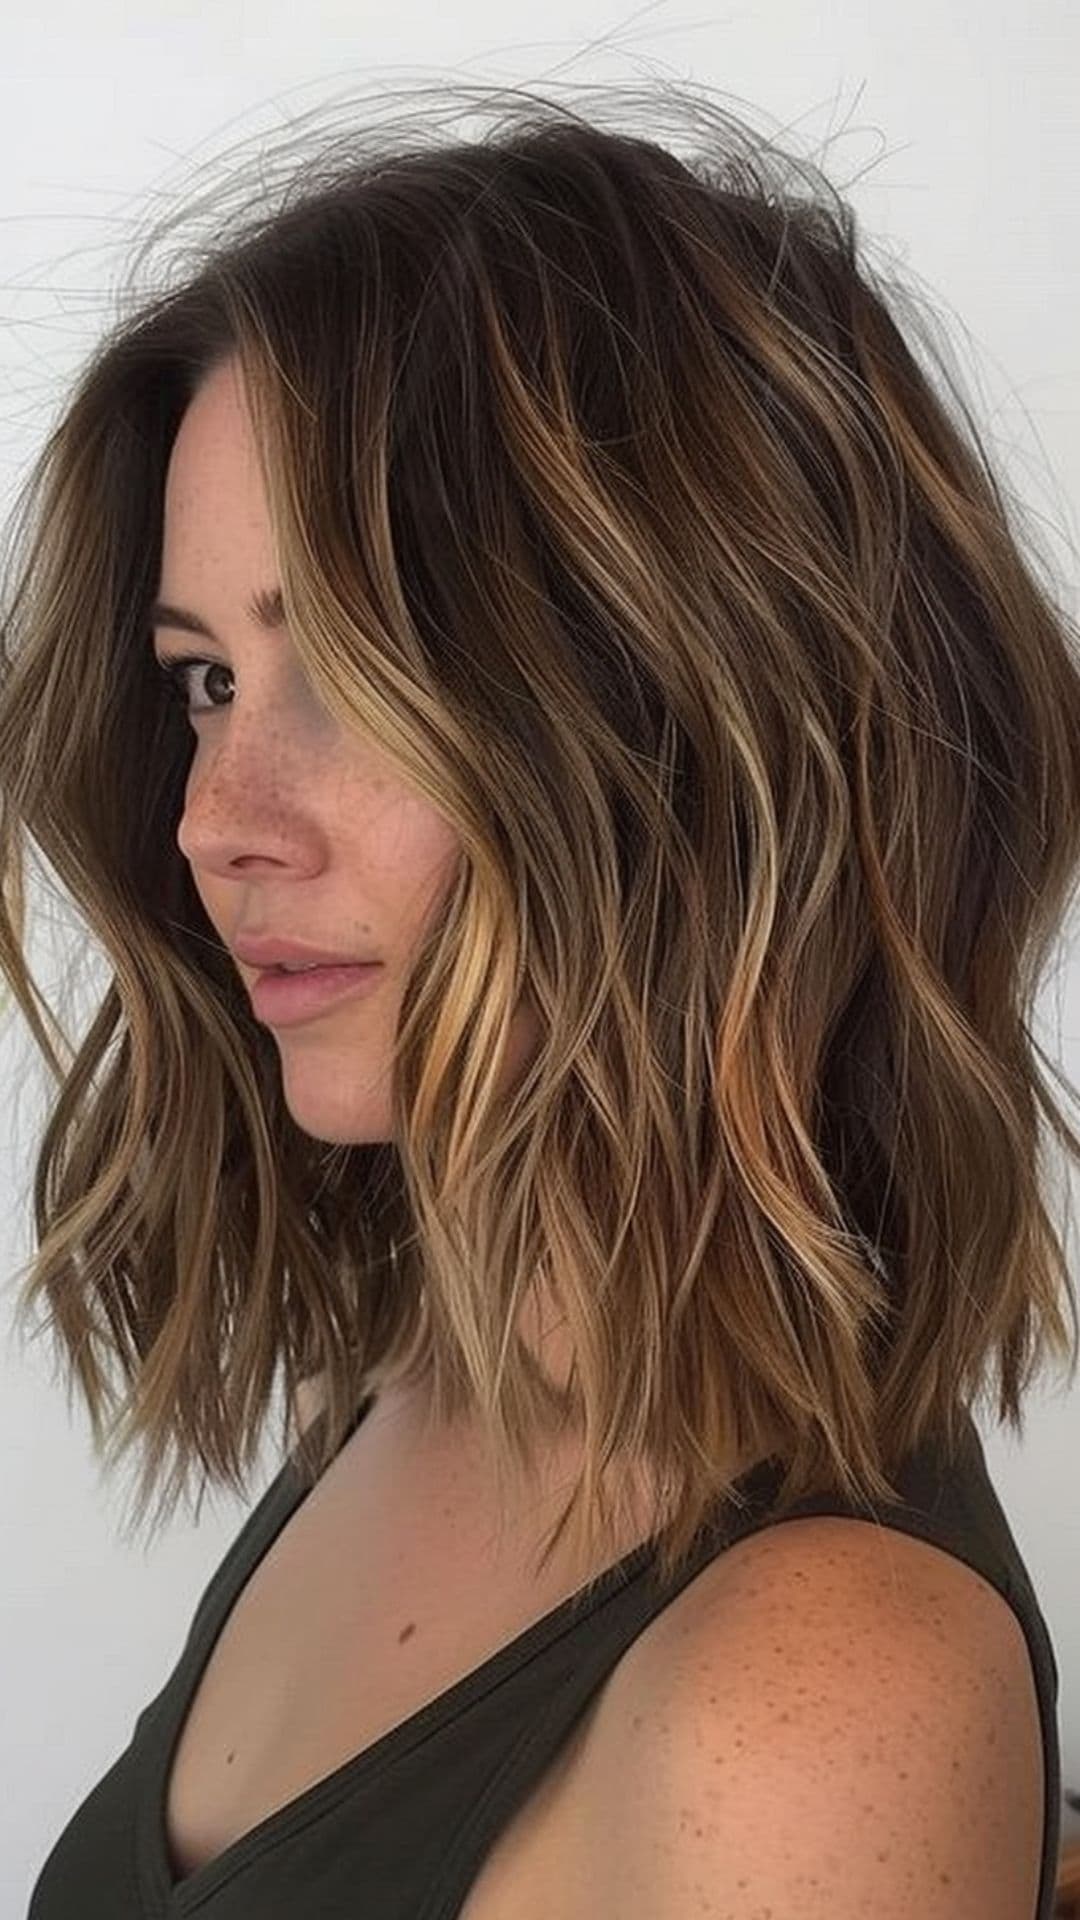 A woman modelling a layered balayage lob with textured ends.